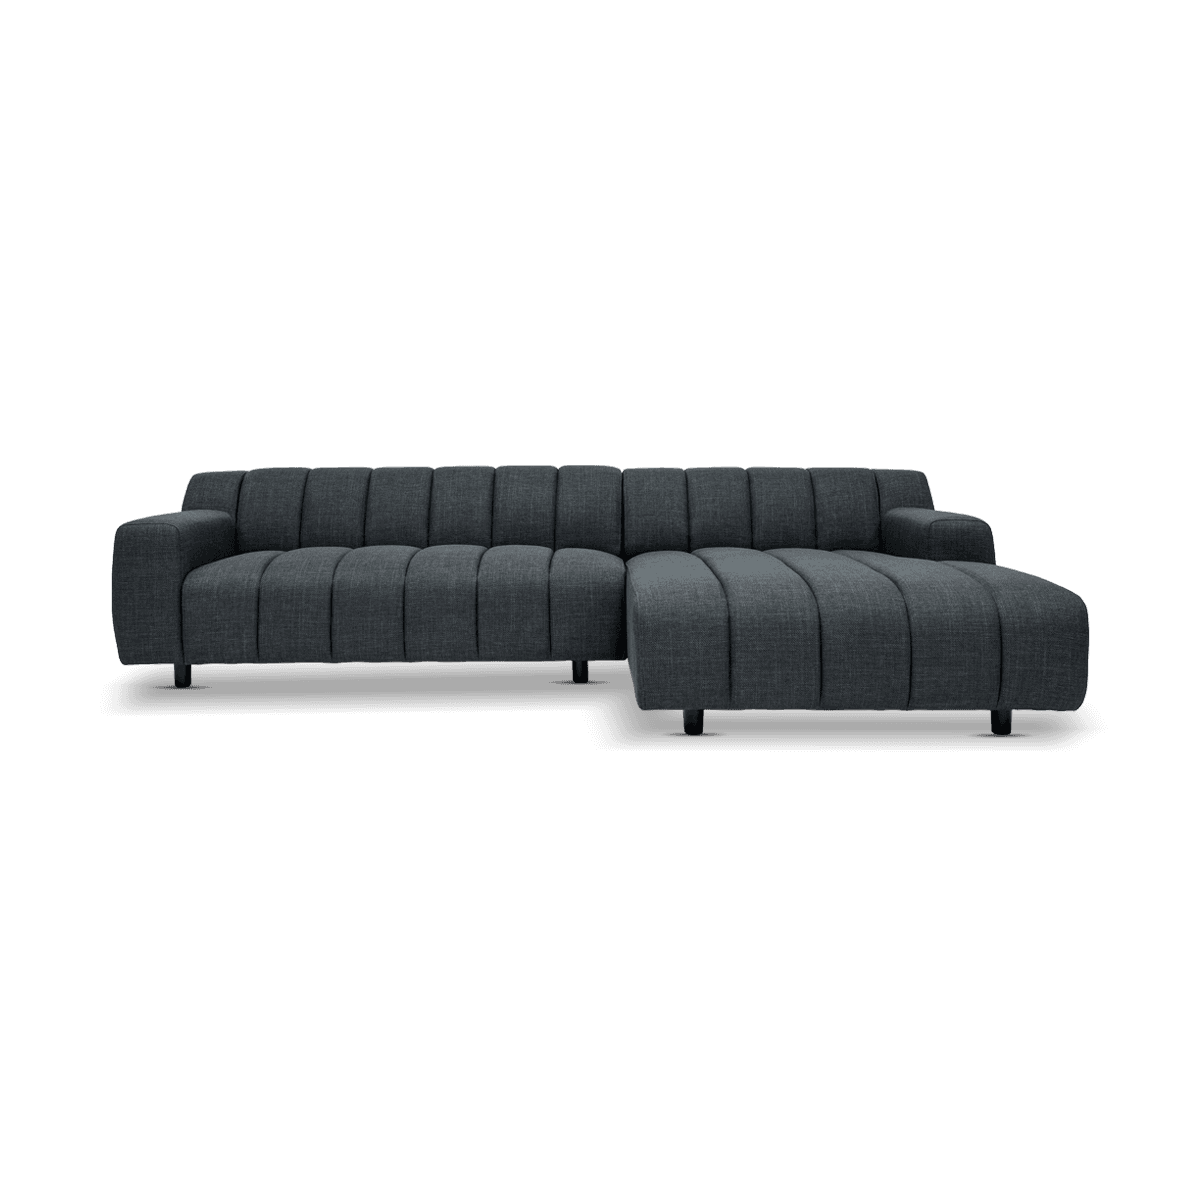 Oakland 2.5 Seater Sofa With Right Chaise longue, Dark Grey